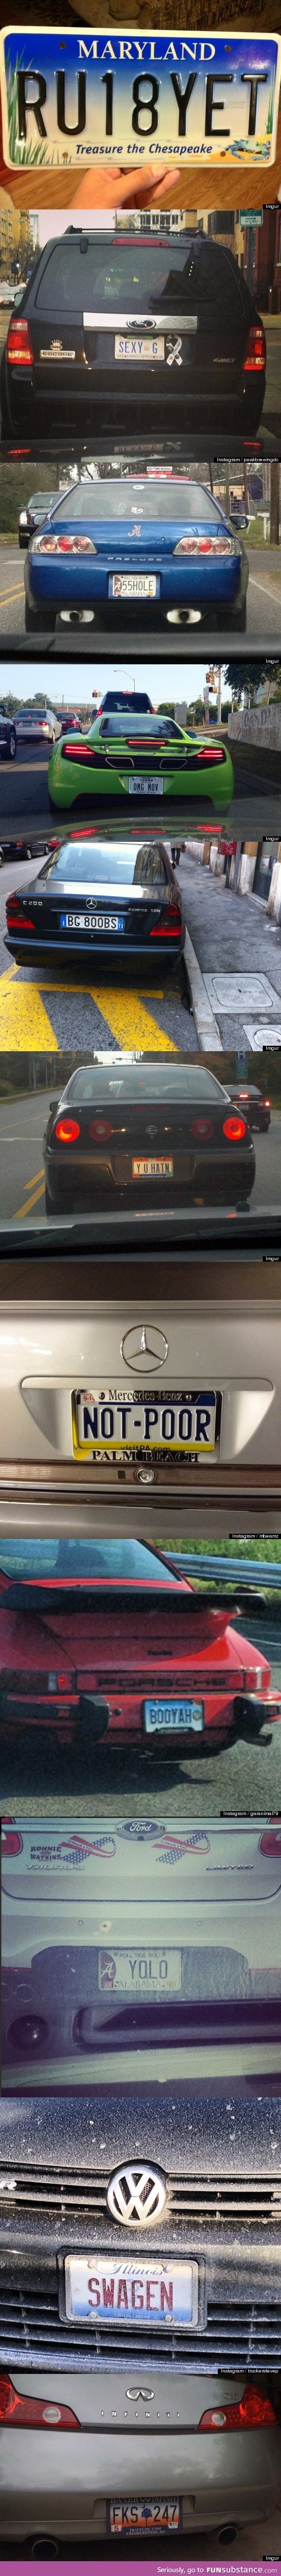 Vanity Plates That Will Make You Shake Your Head